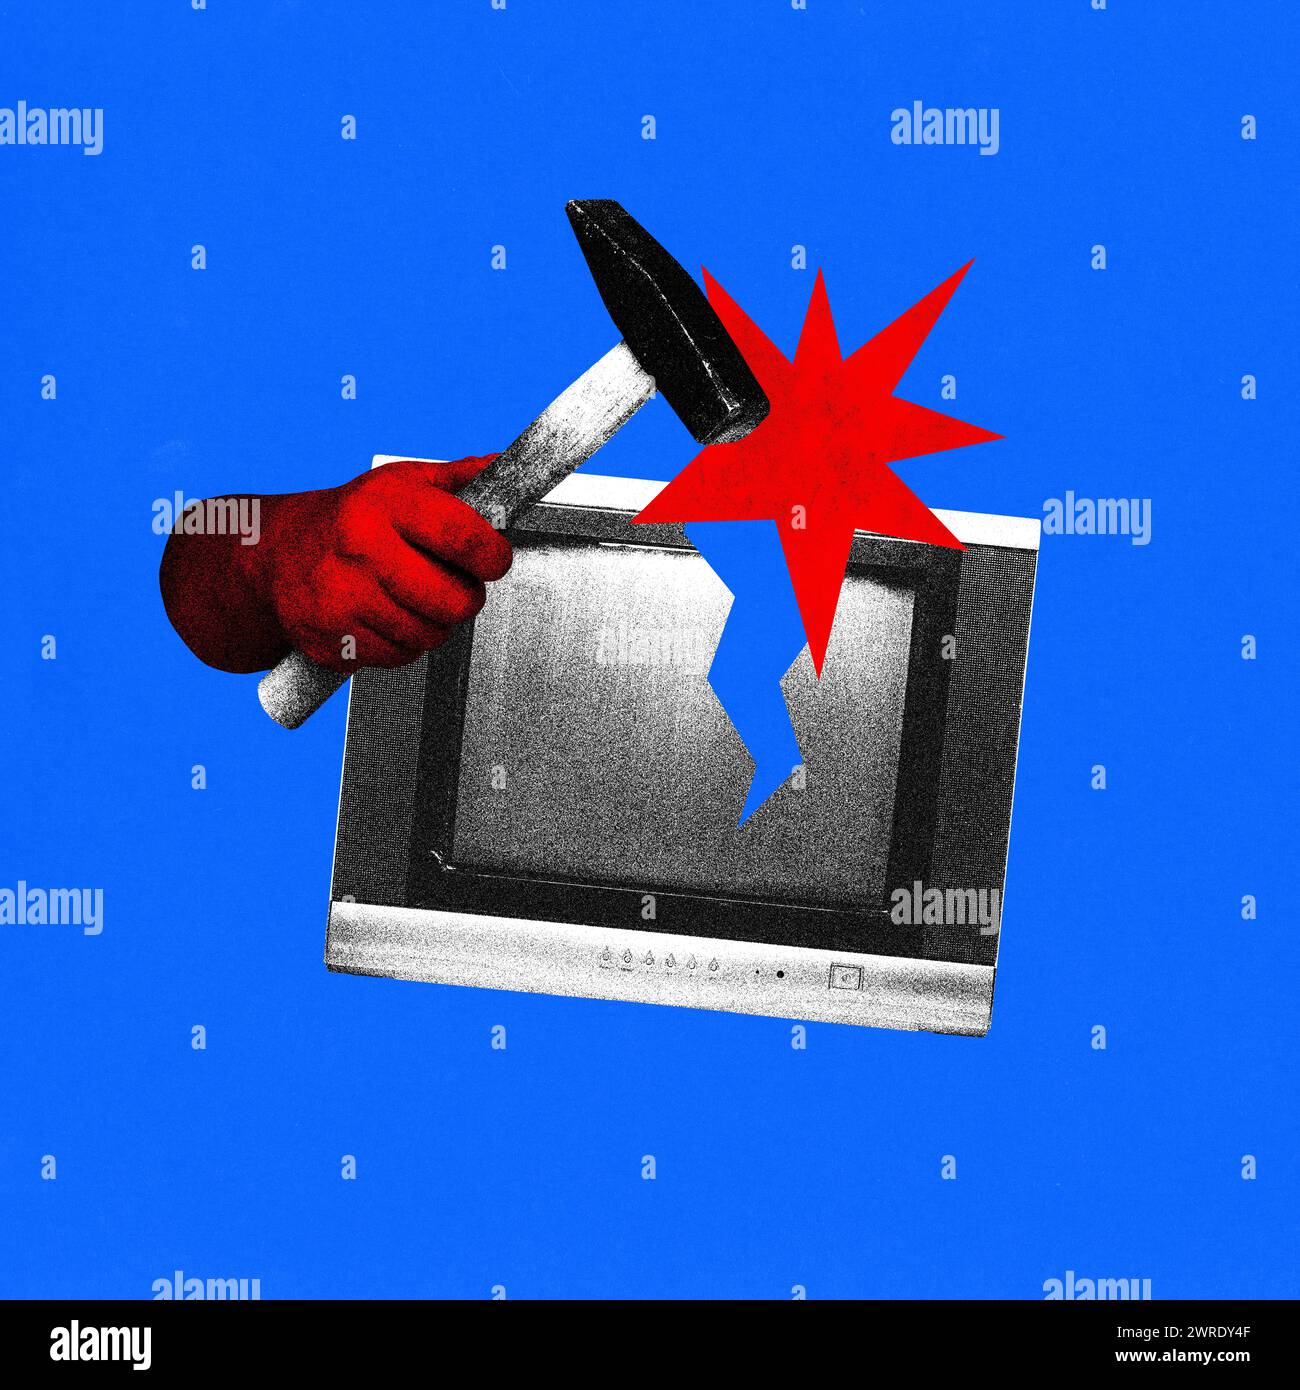 Poster. Contemporary art collage. Hand with hammer smashes vintage TV against blue background. Vibrant abstract design. Stock Photo